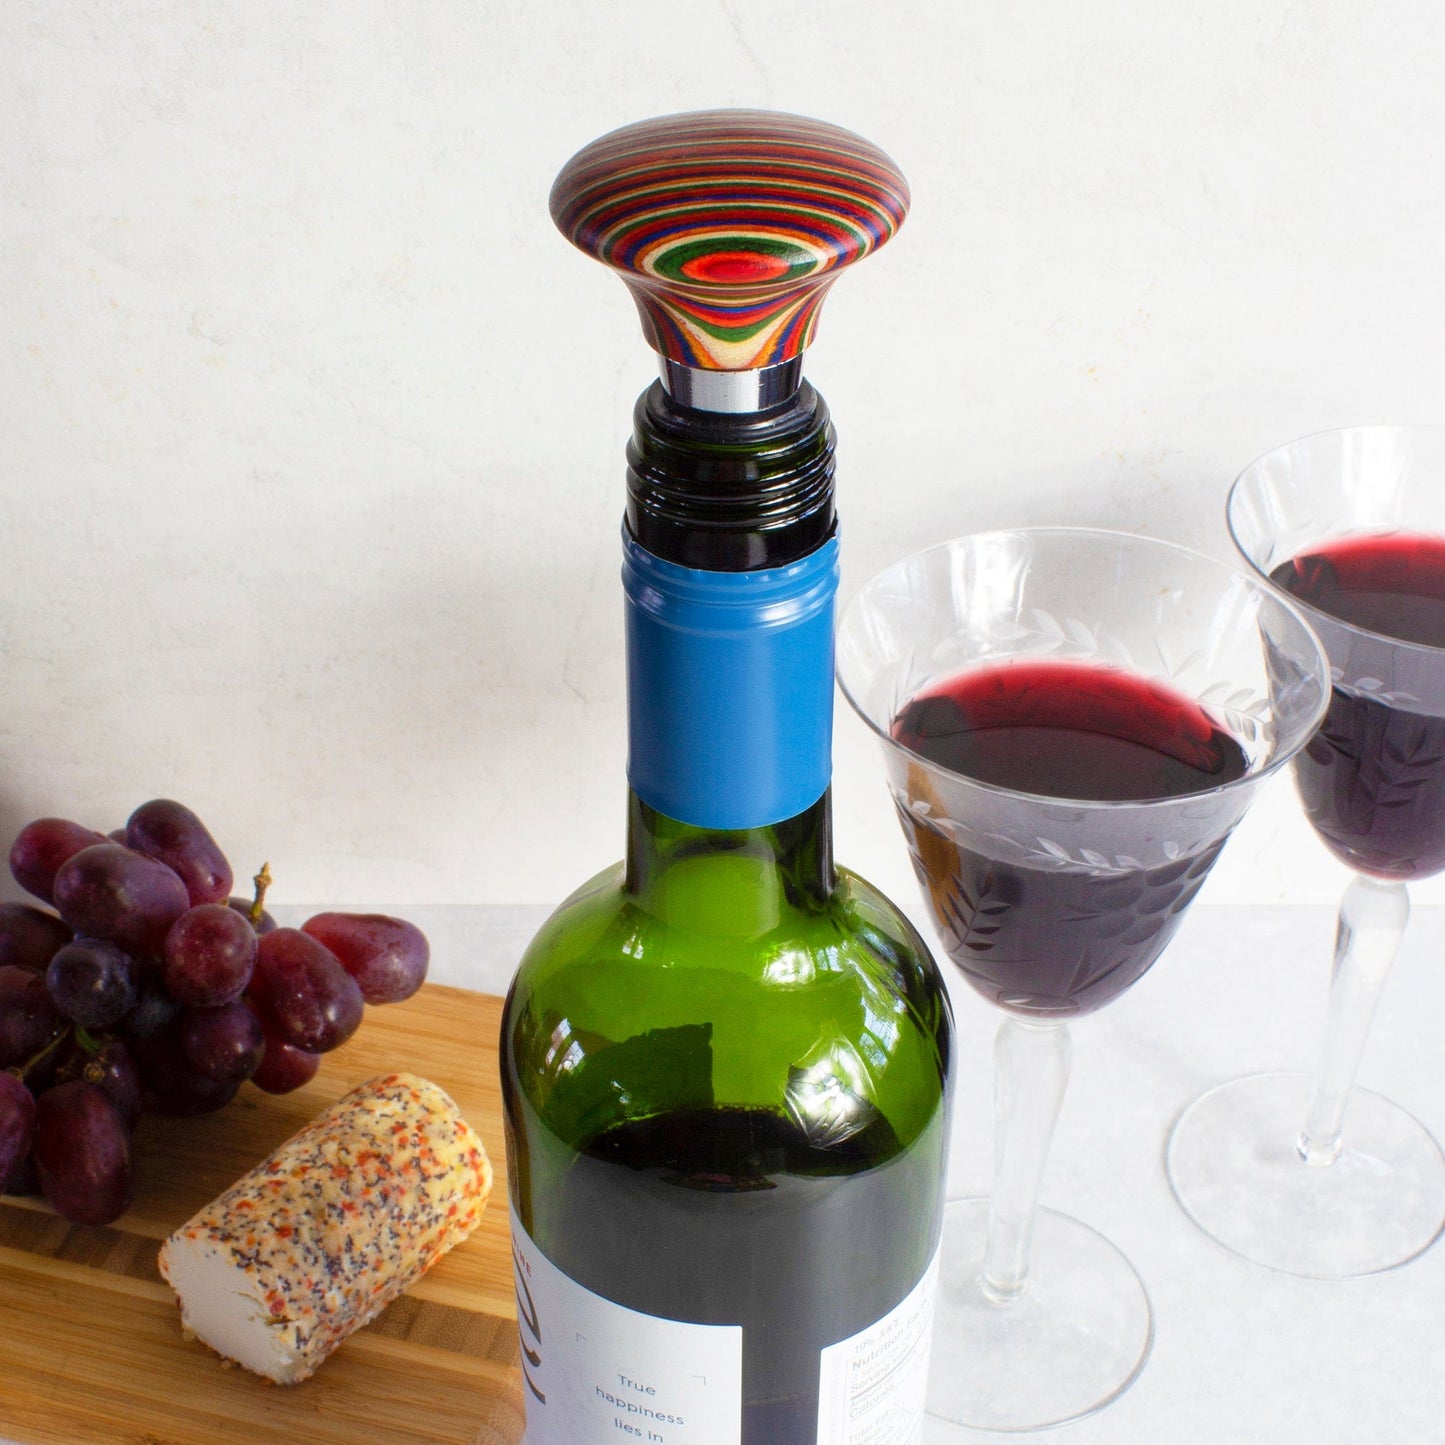 convex marrakesh bottle stopper on a bottle of wine set on a table with glasses of wine and grapes.